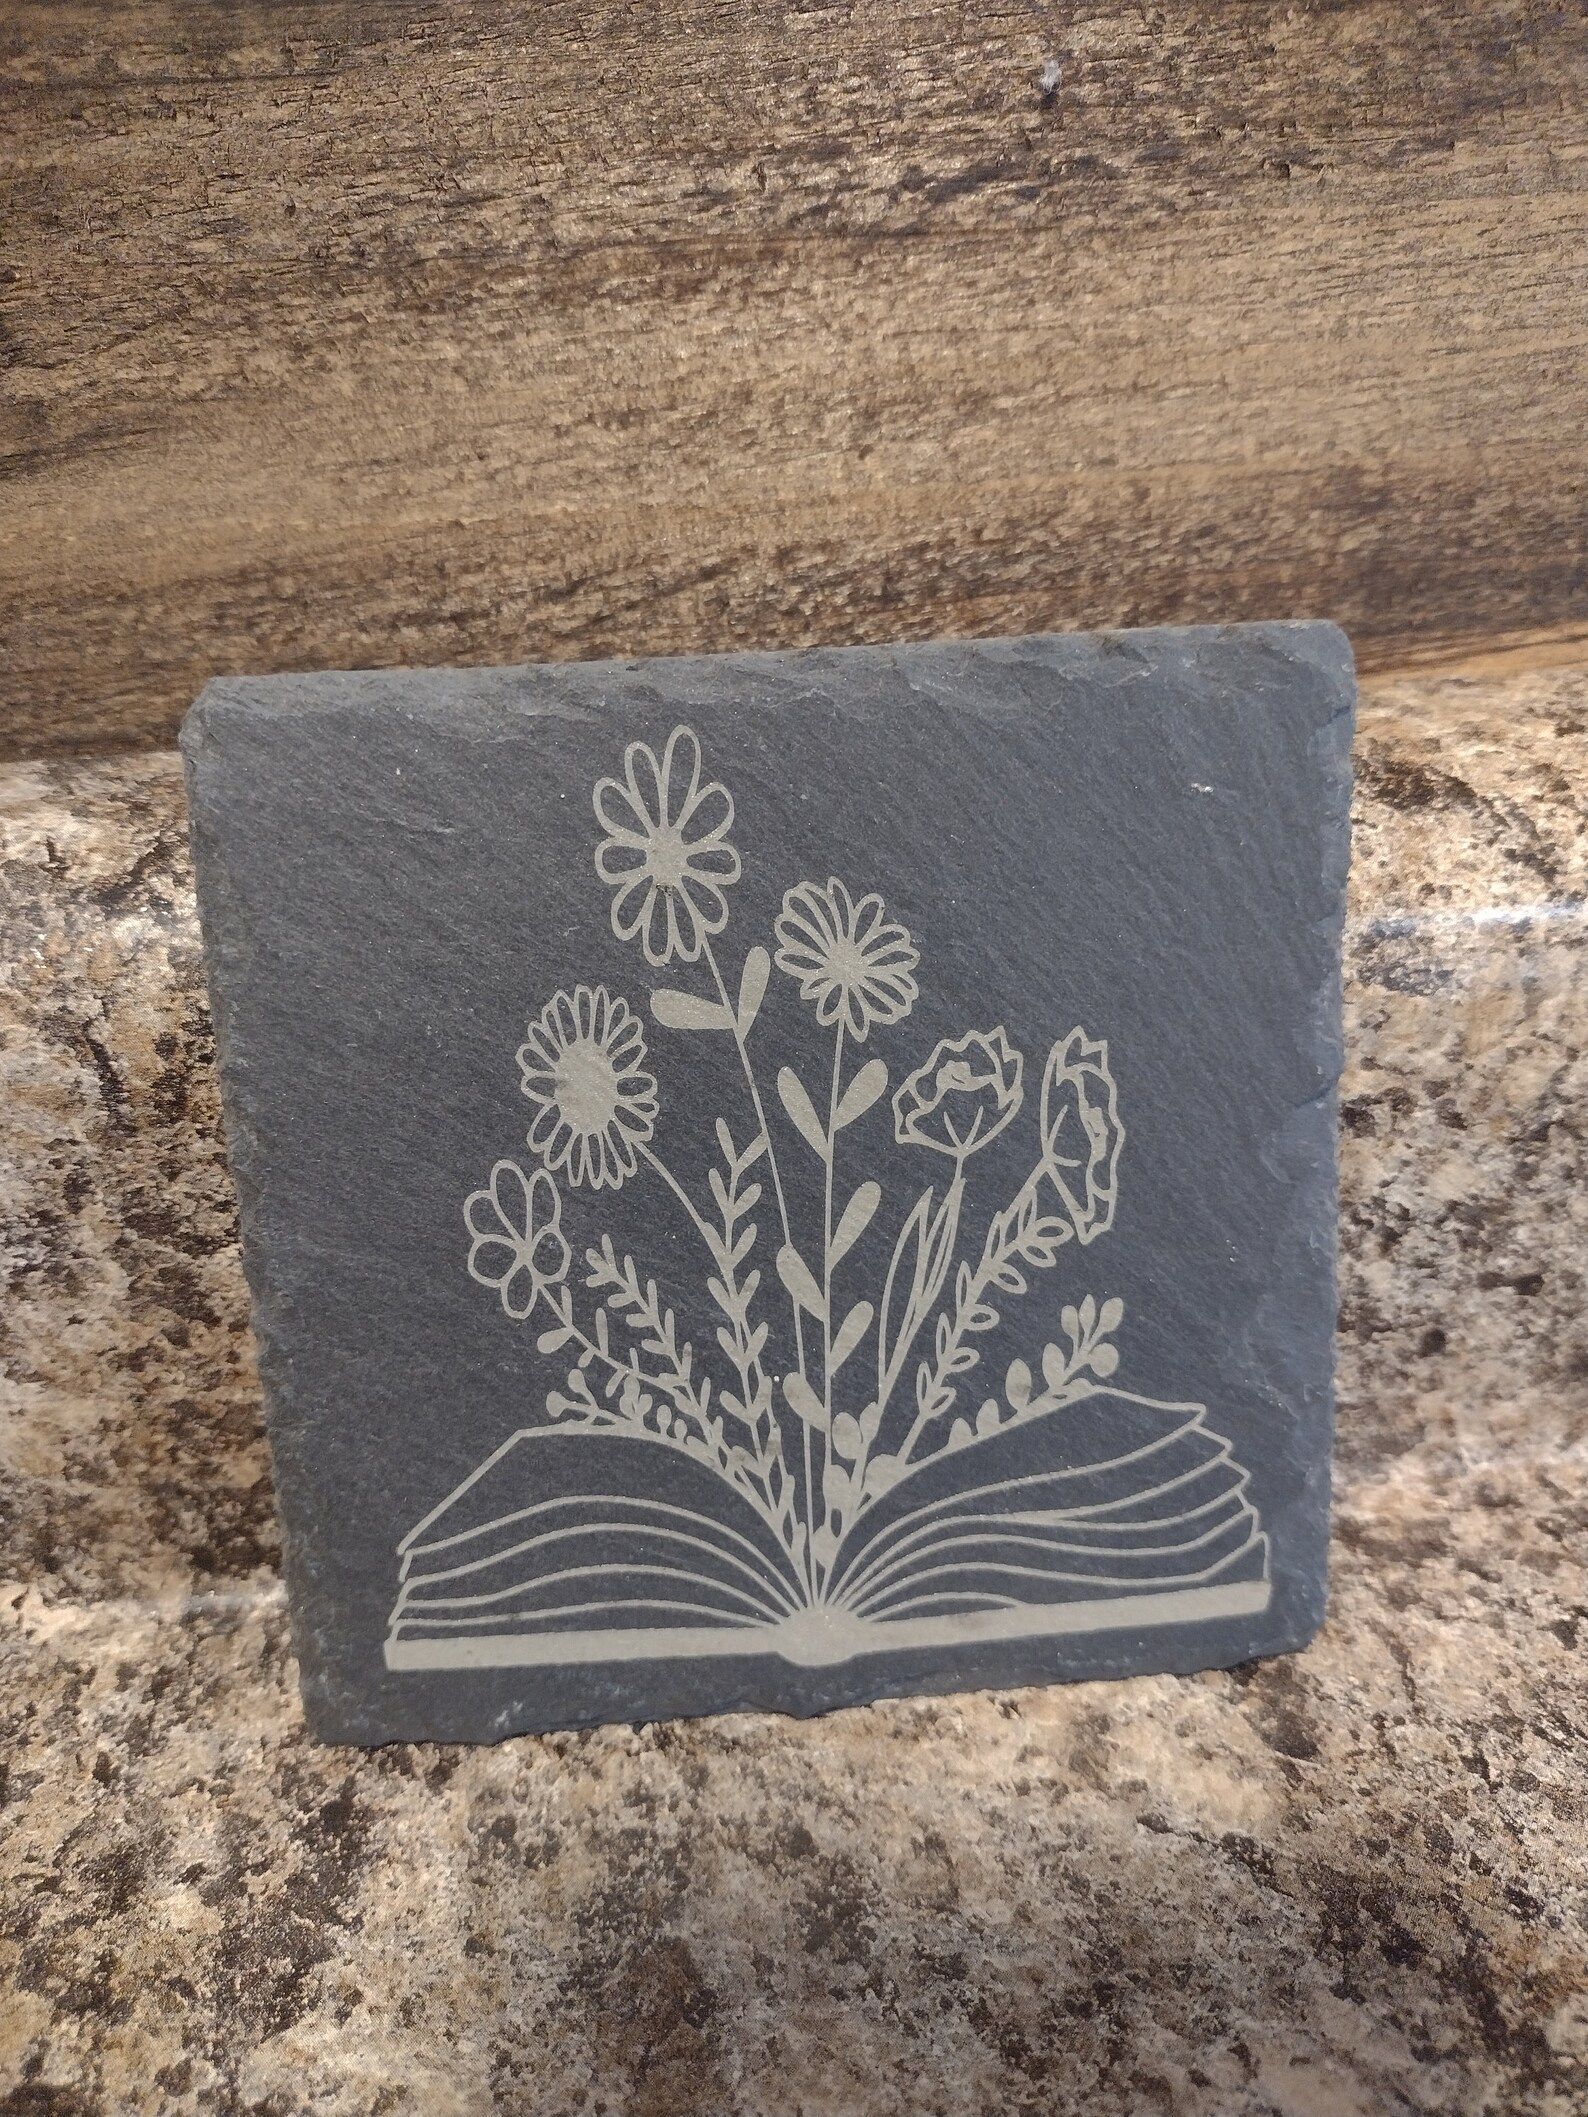 Flower and Book stone coaster is in front of a granite countertop.